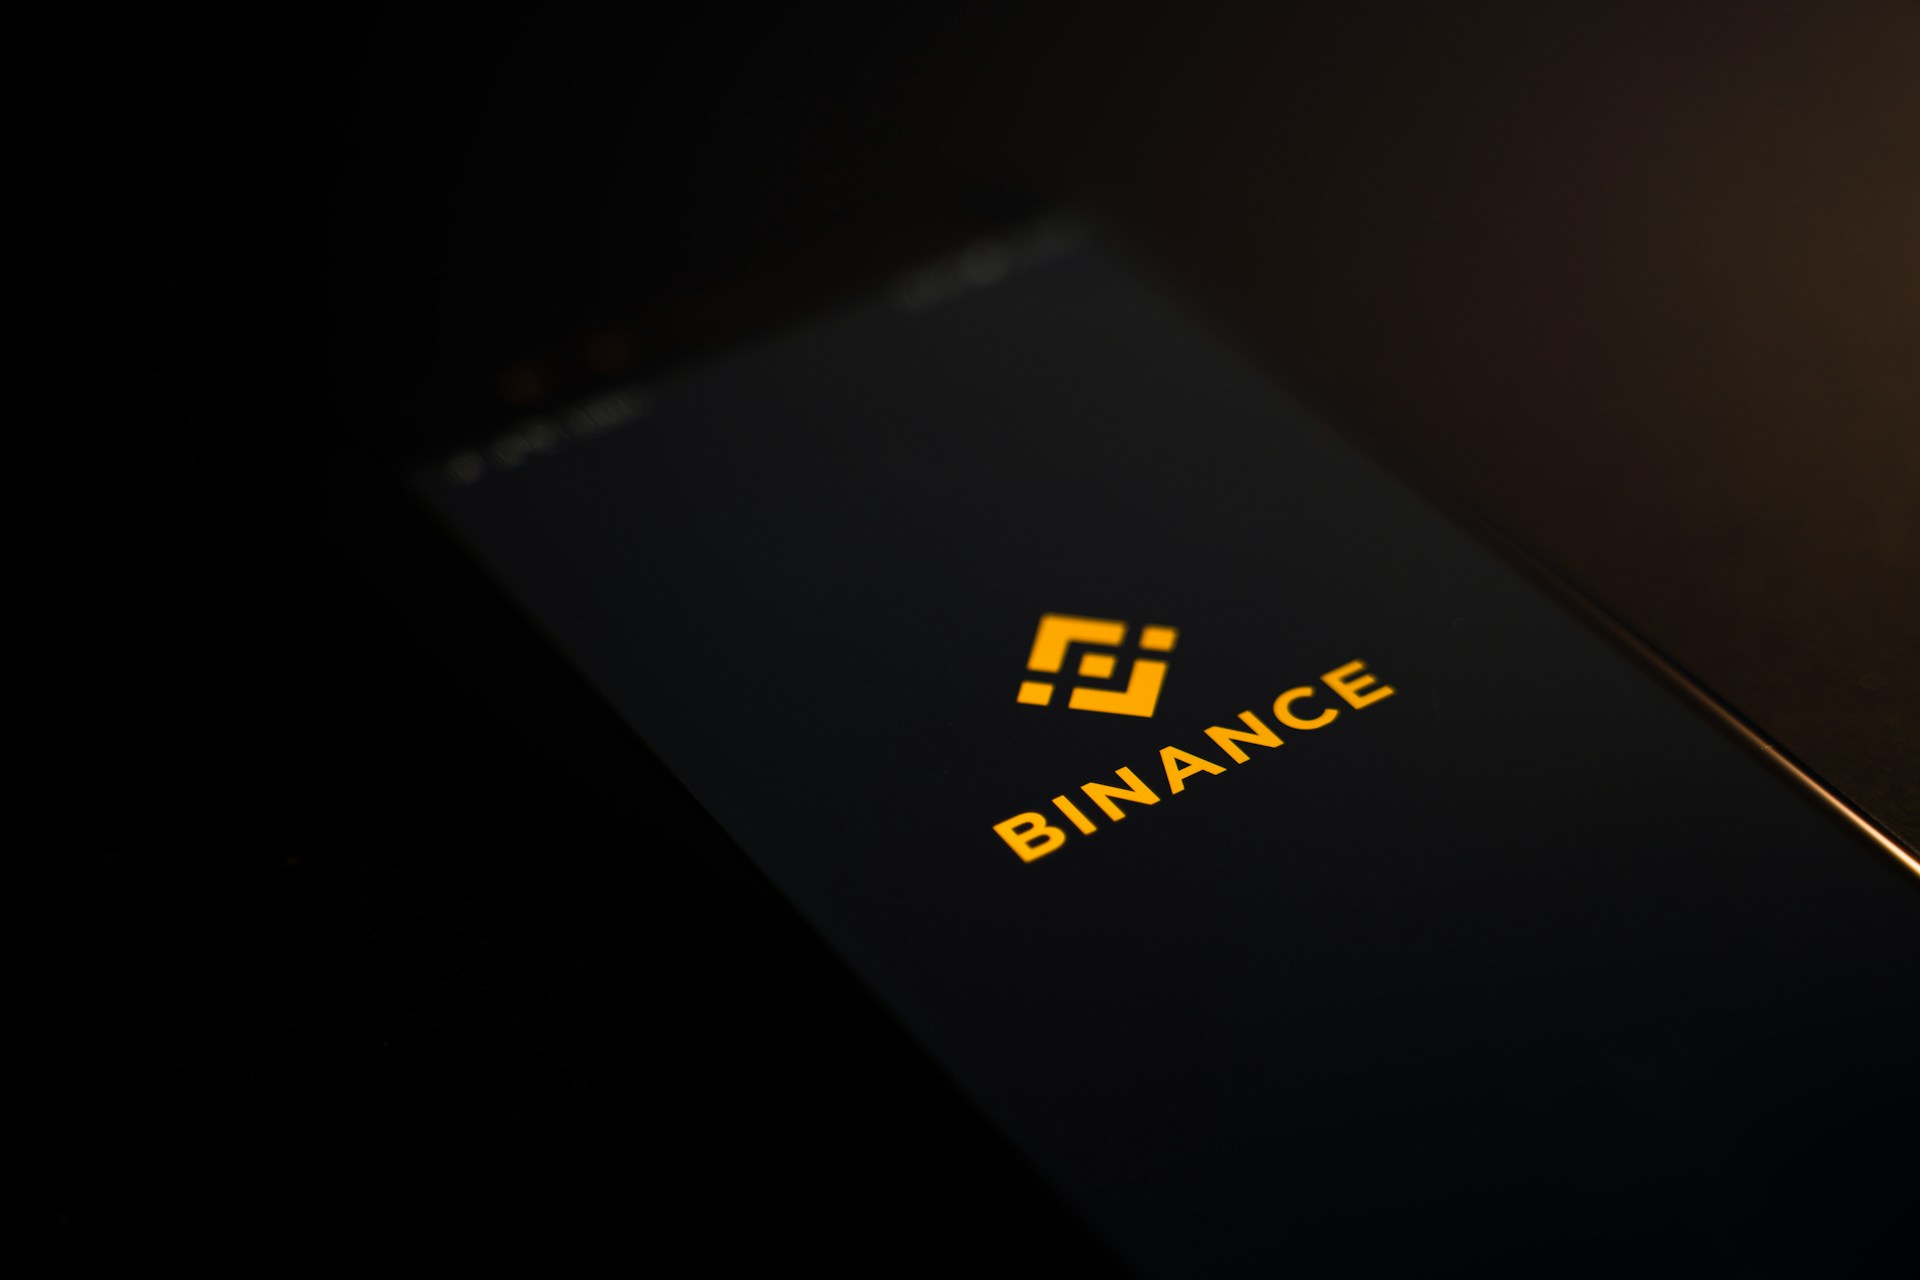 Nigeria hits Binance with a massive $10 billion fine over allegations the crypto exchange illegally profited from forex activities that worsened the country's crippling currency crisis.